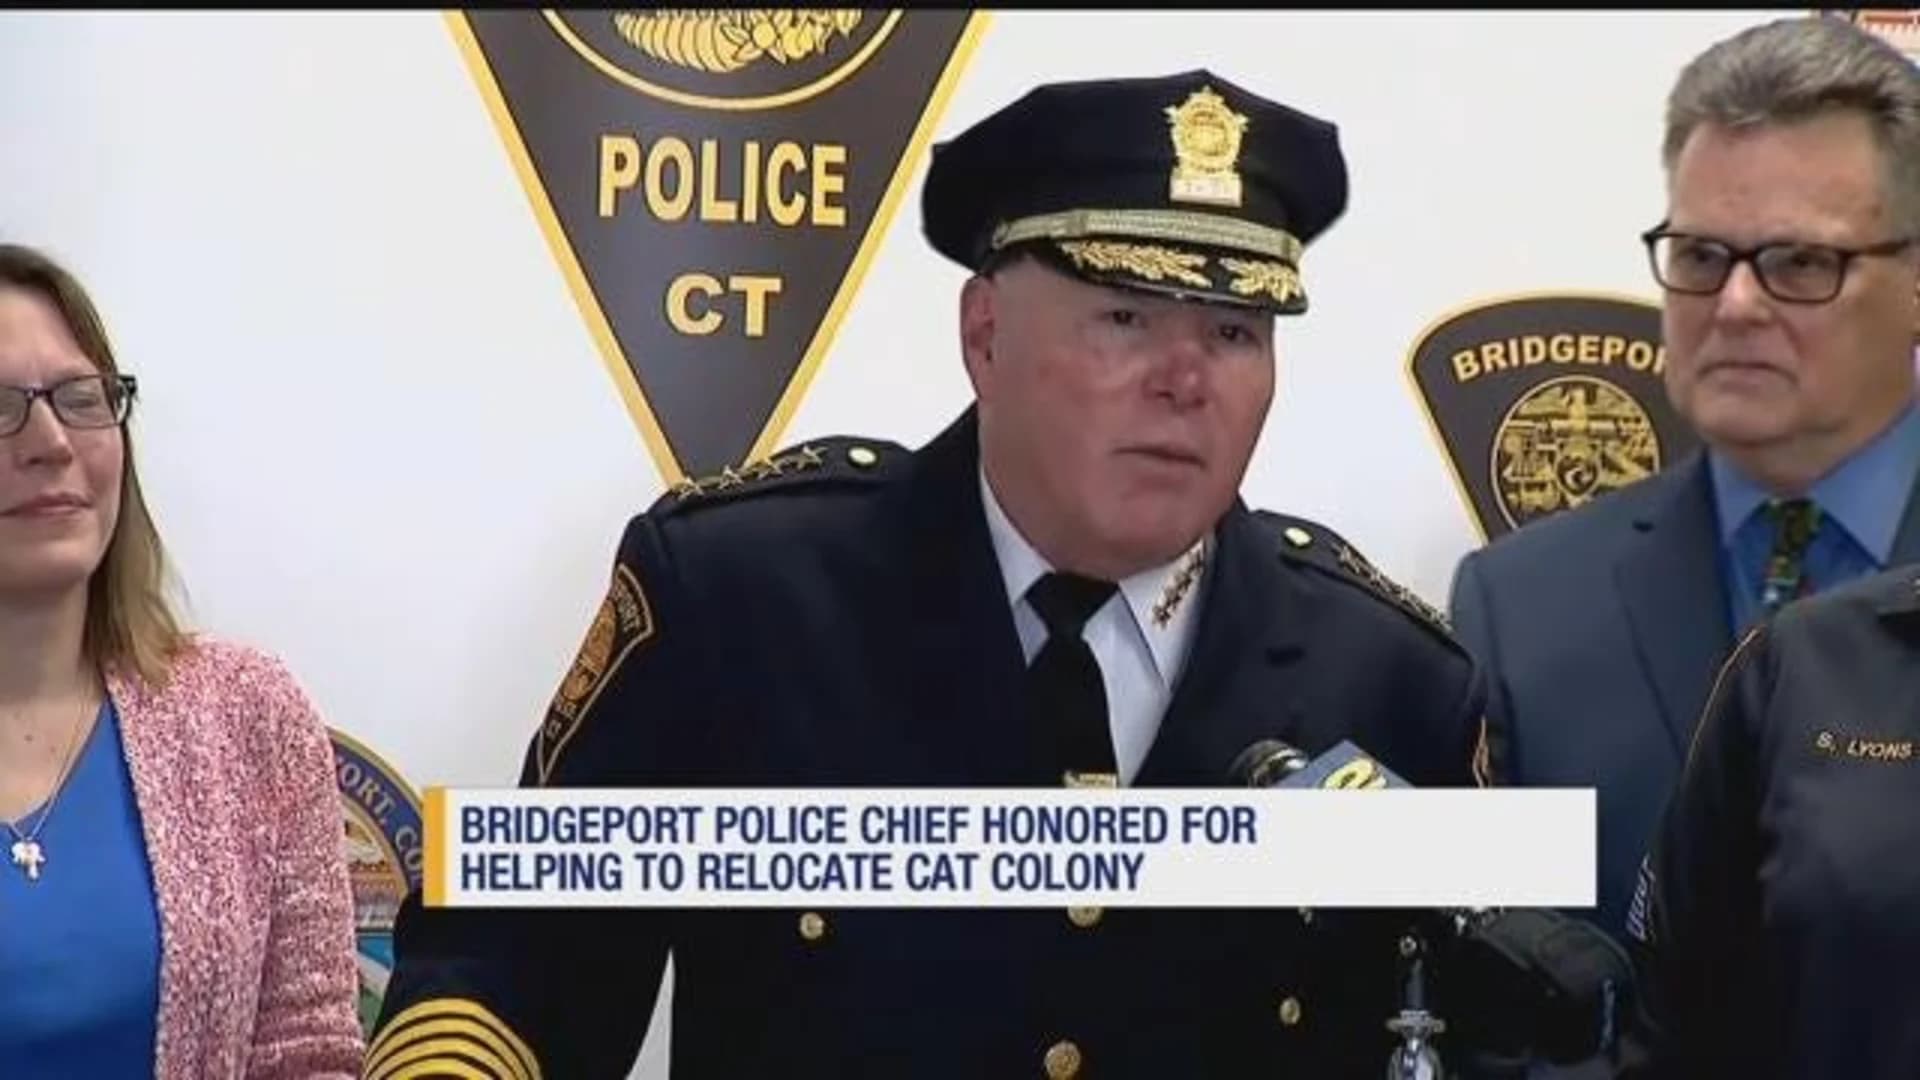 Bridgeport police chief honored for helping relocate cat colony